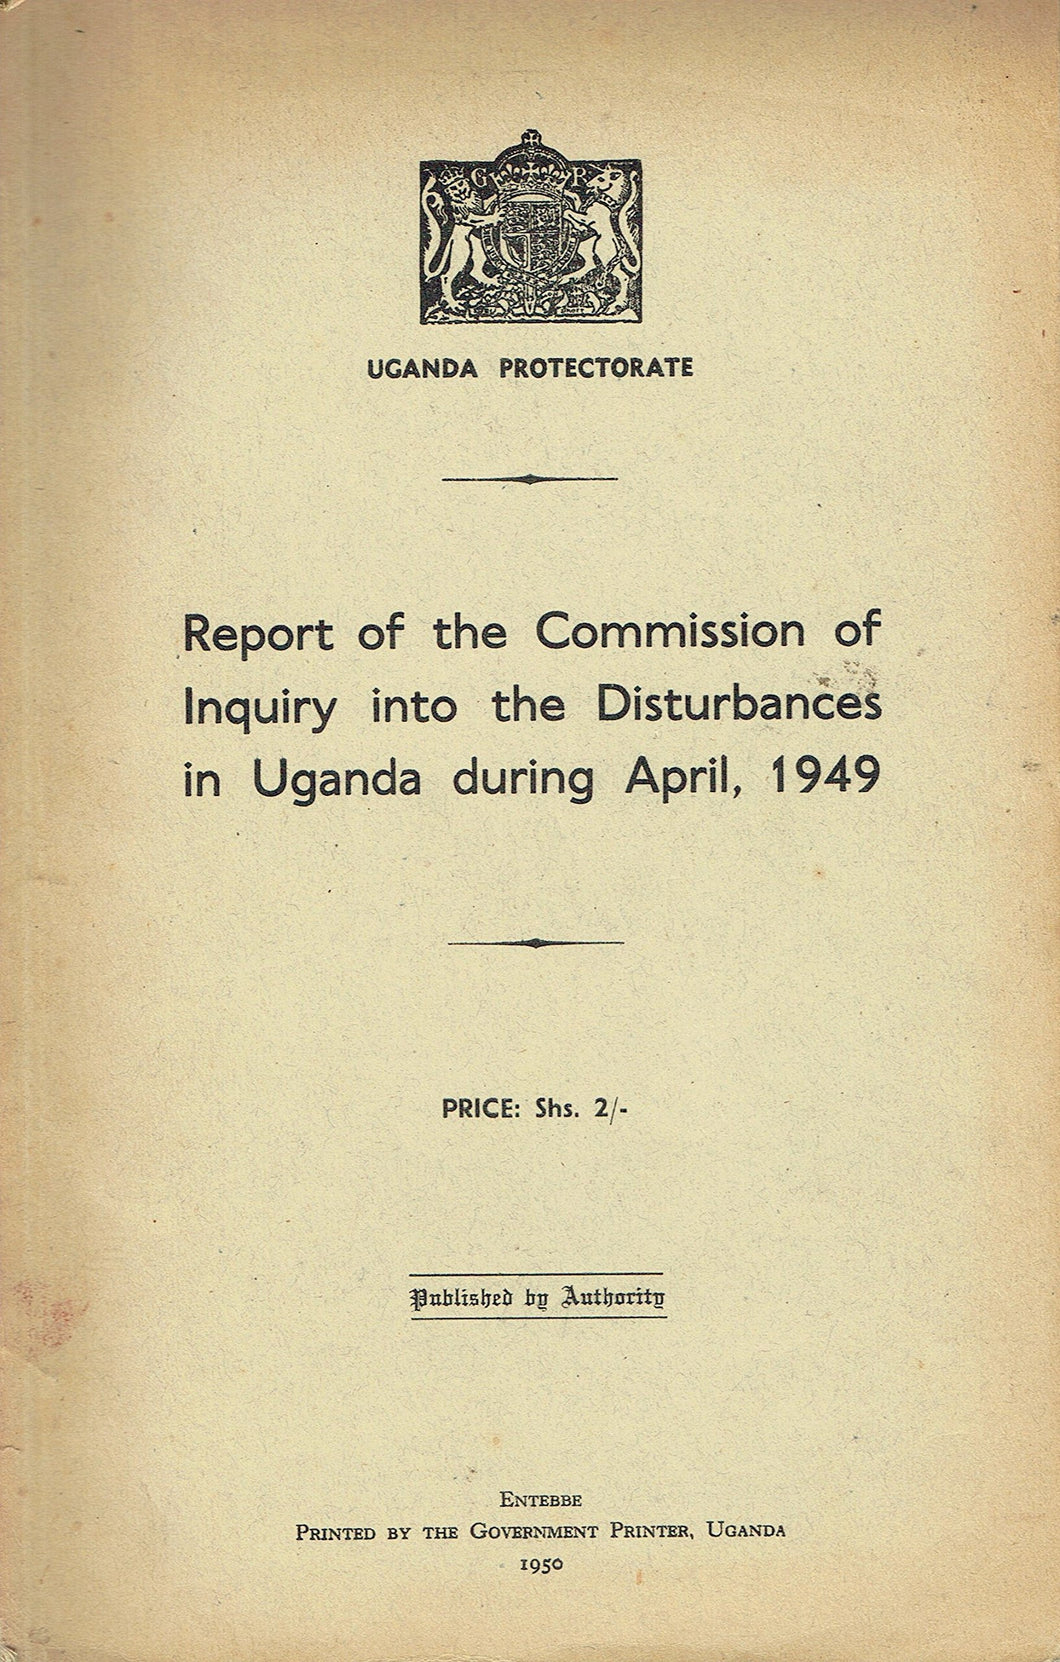 Report of the Commission of Inquiry into the Disturbances in Uganda during April, 1949